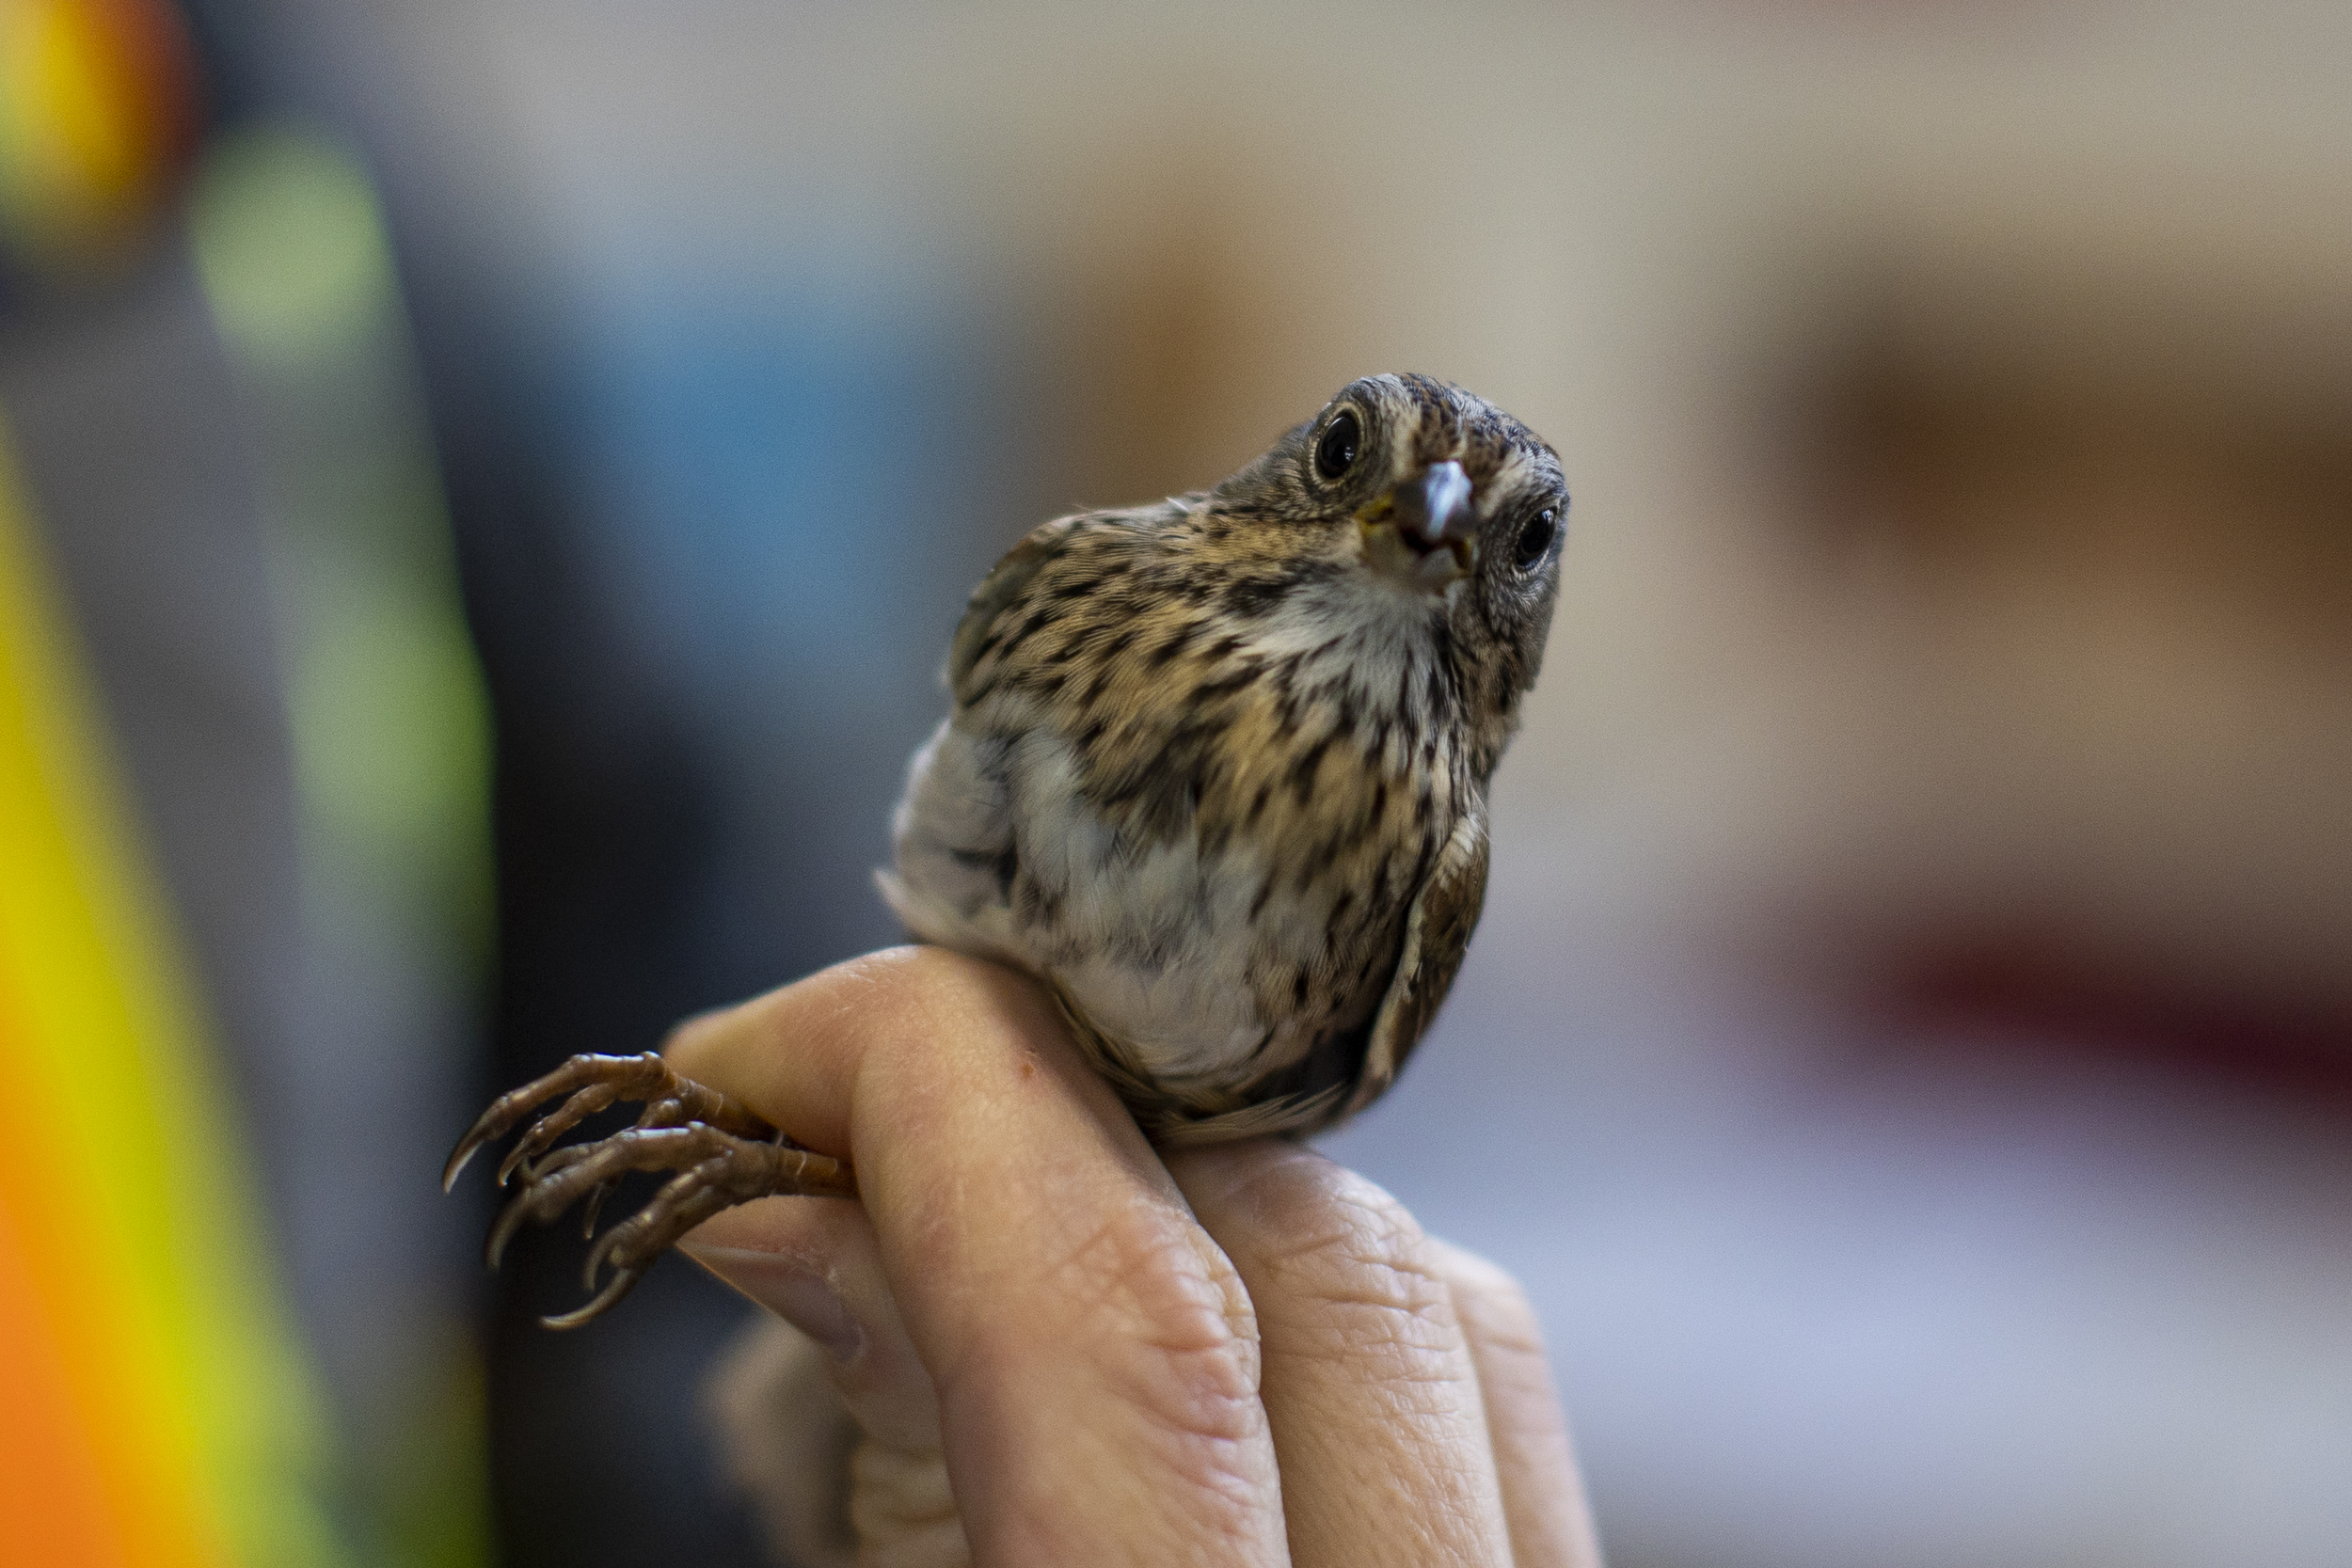 A close up of a sparrow, held by its legs, staring at the camera.